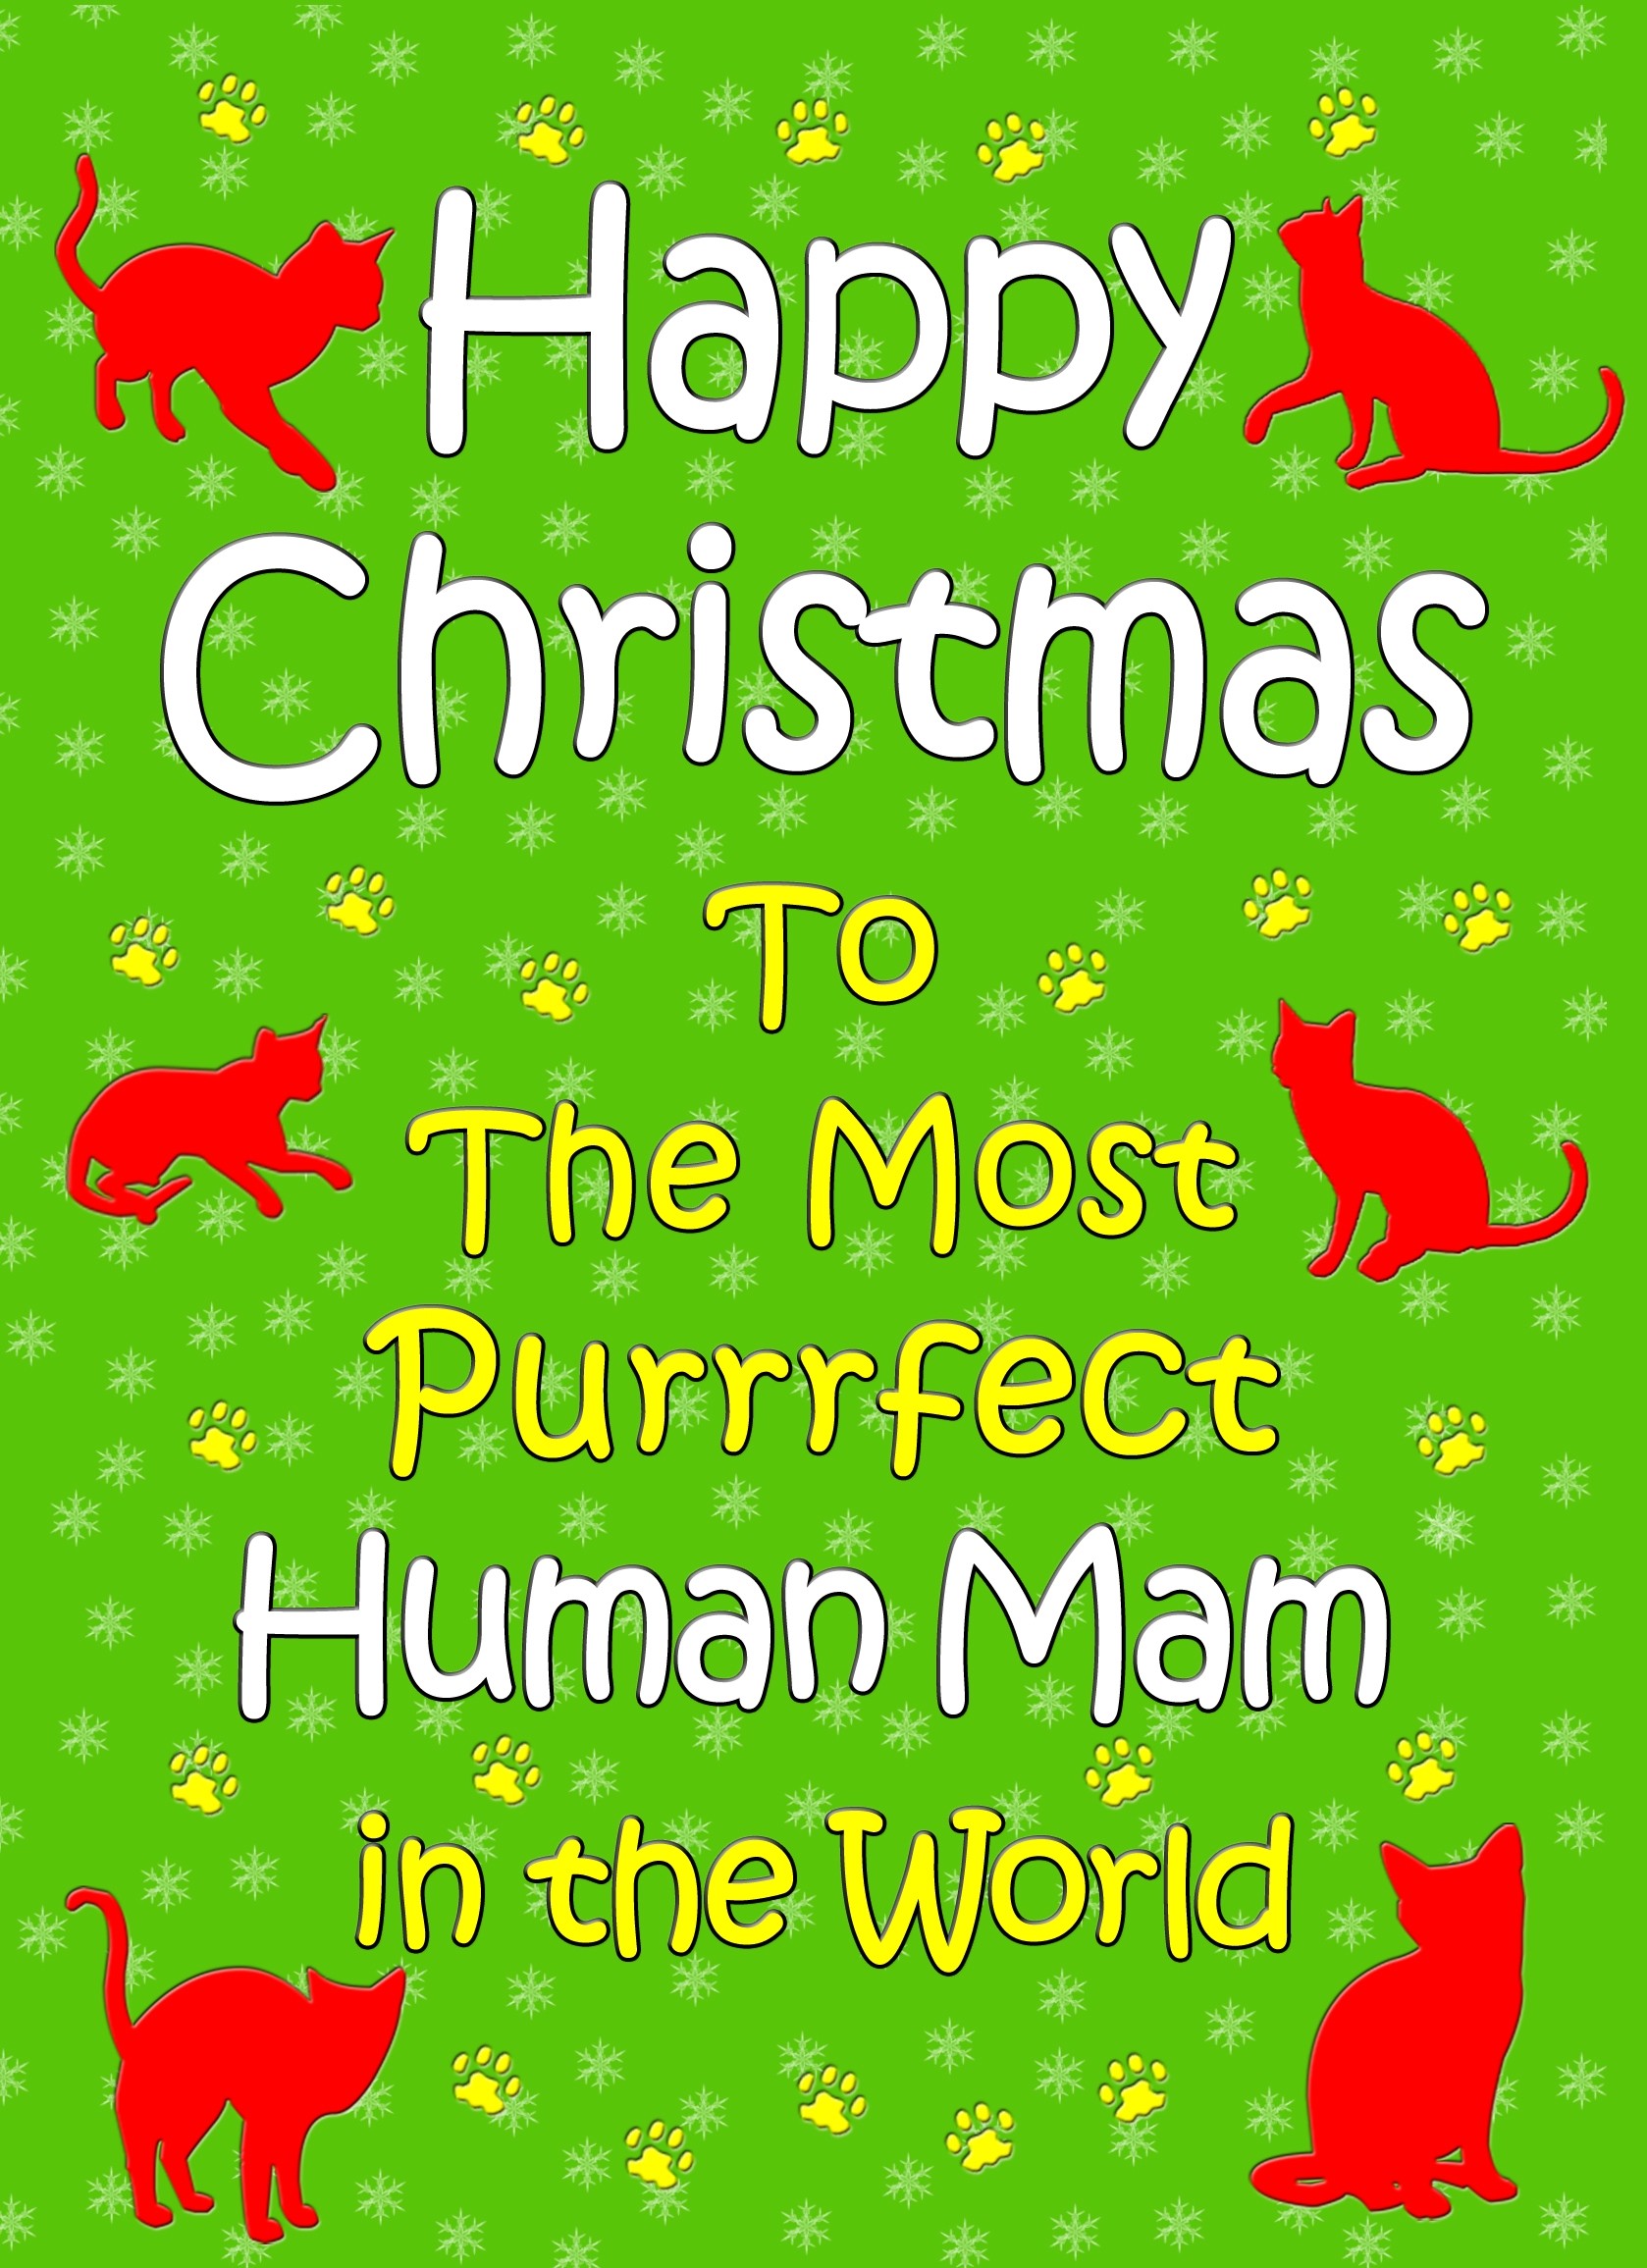 From The Cat Christmas Card (Human Mam, Green)